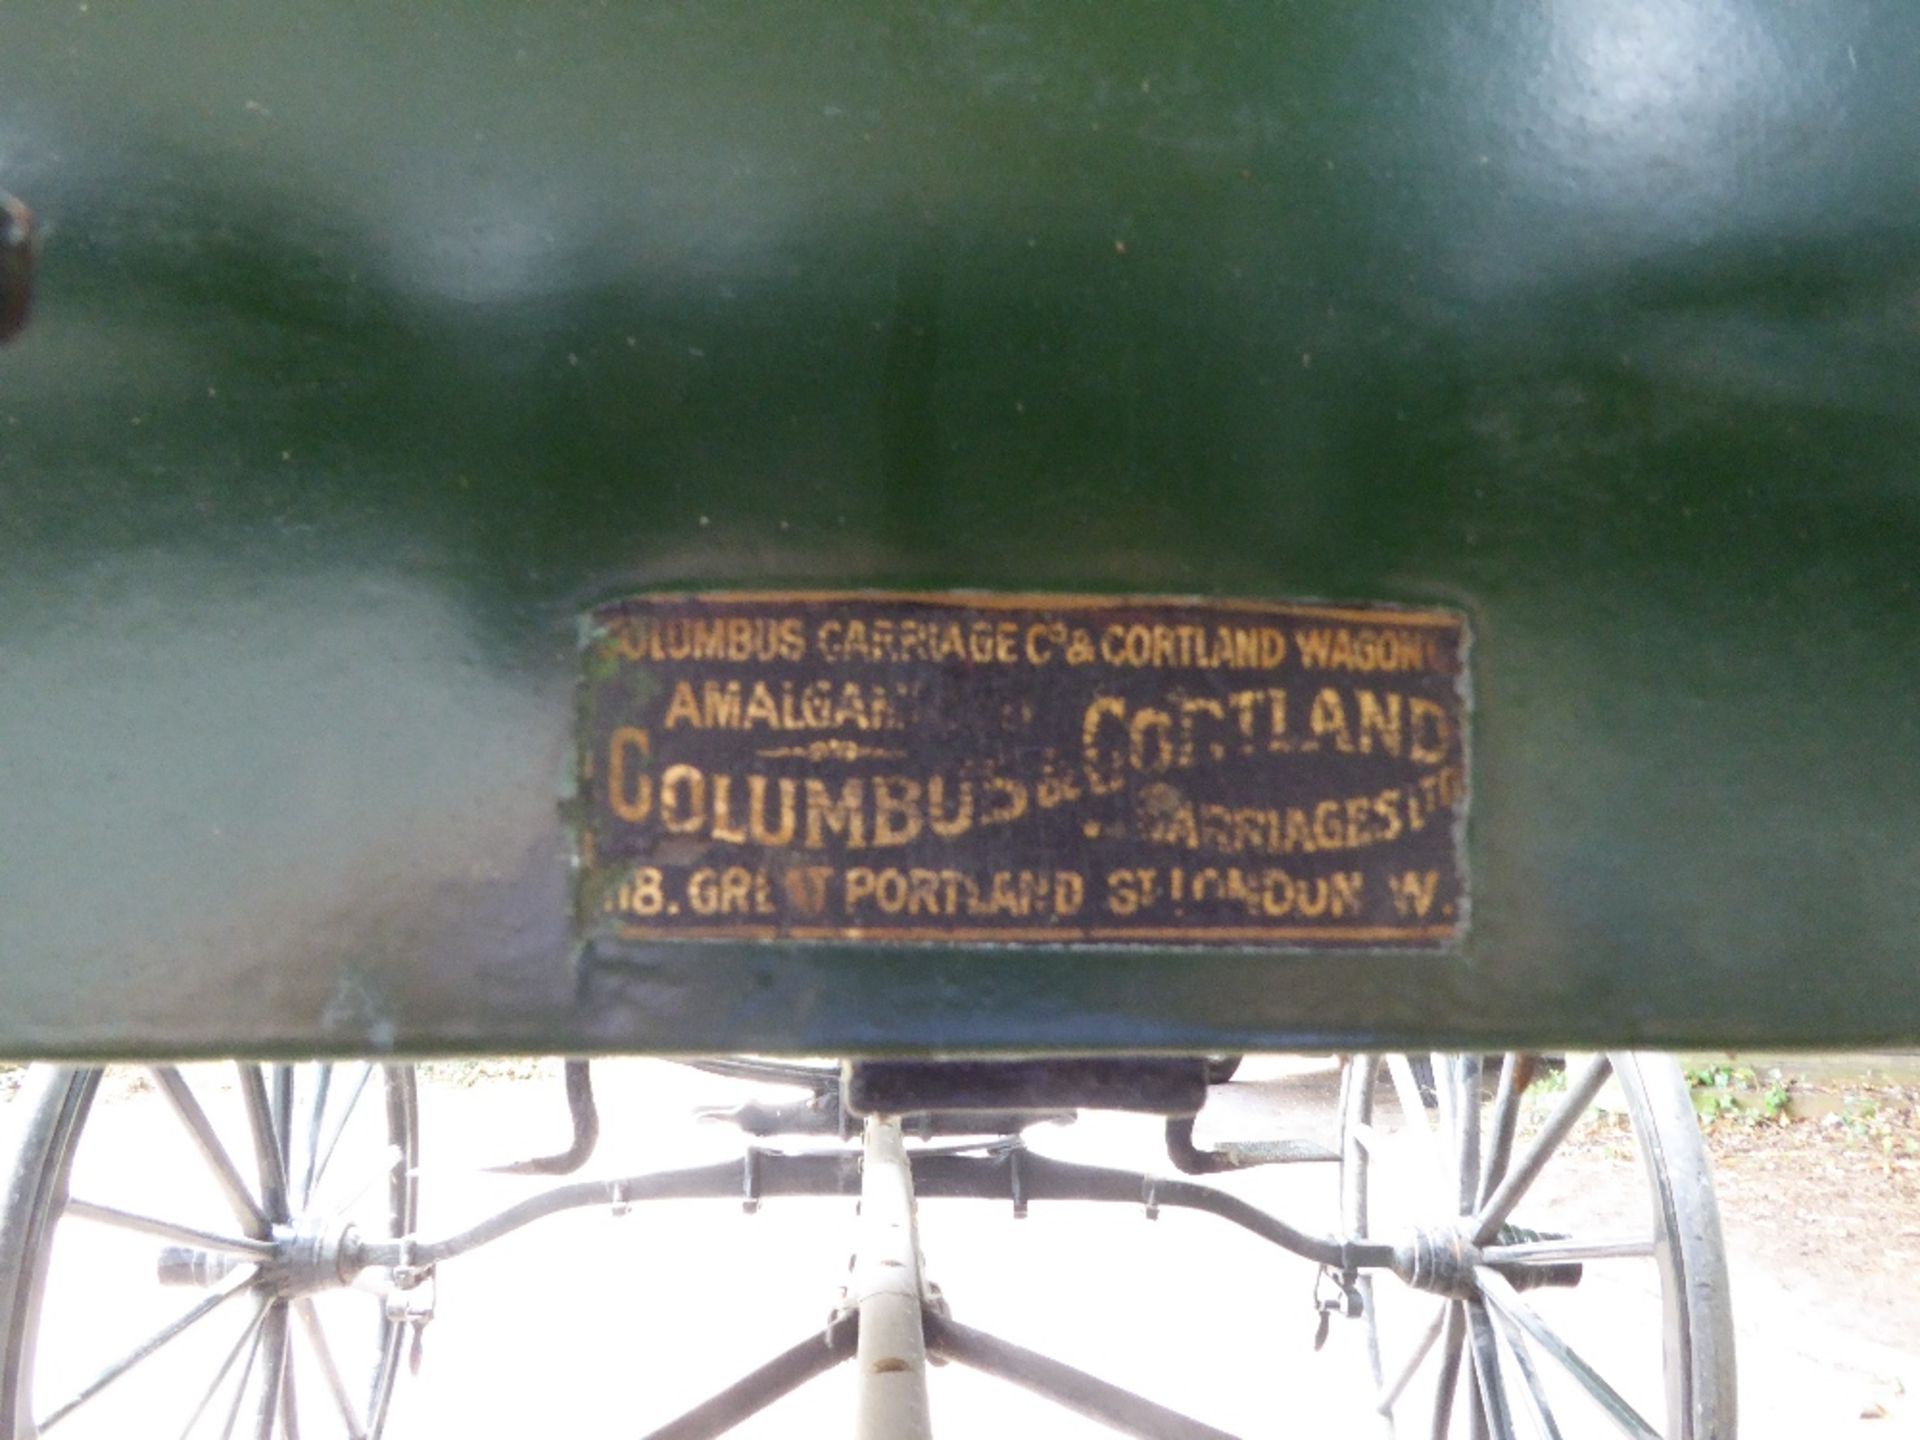 4-WHEEL BUGGY from Columbus & Cortland Carriages Ltd of London c. 1900, to suit 14 to 16hh single or - Image 10 of 10